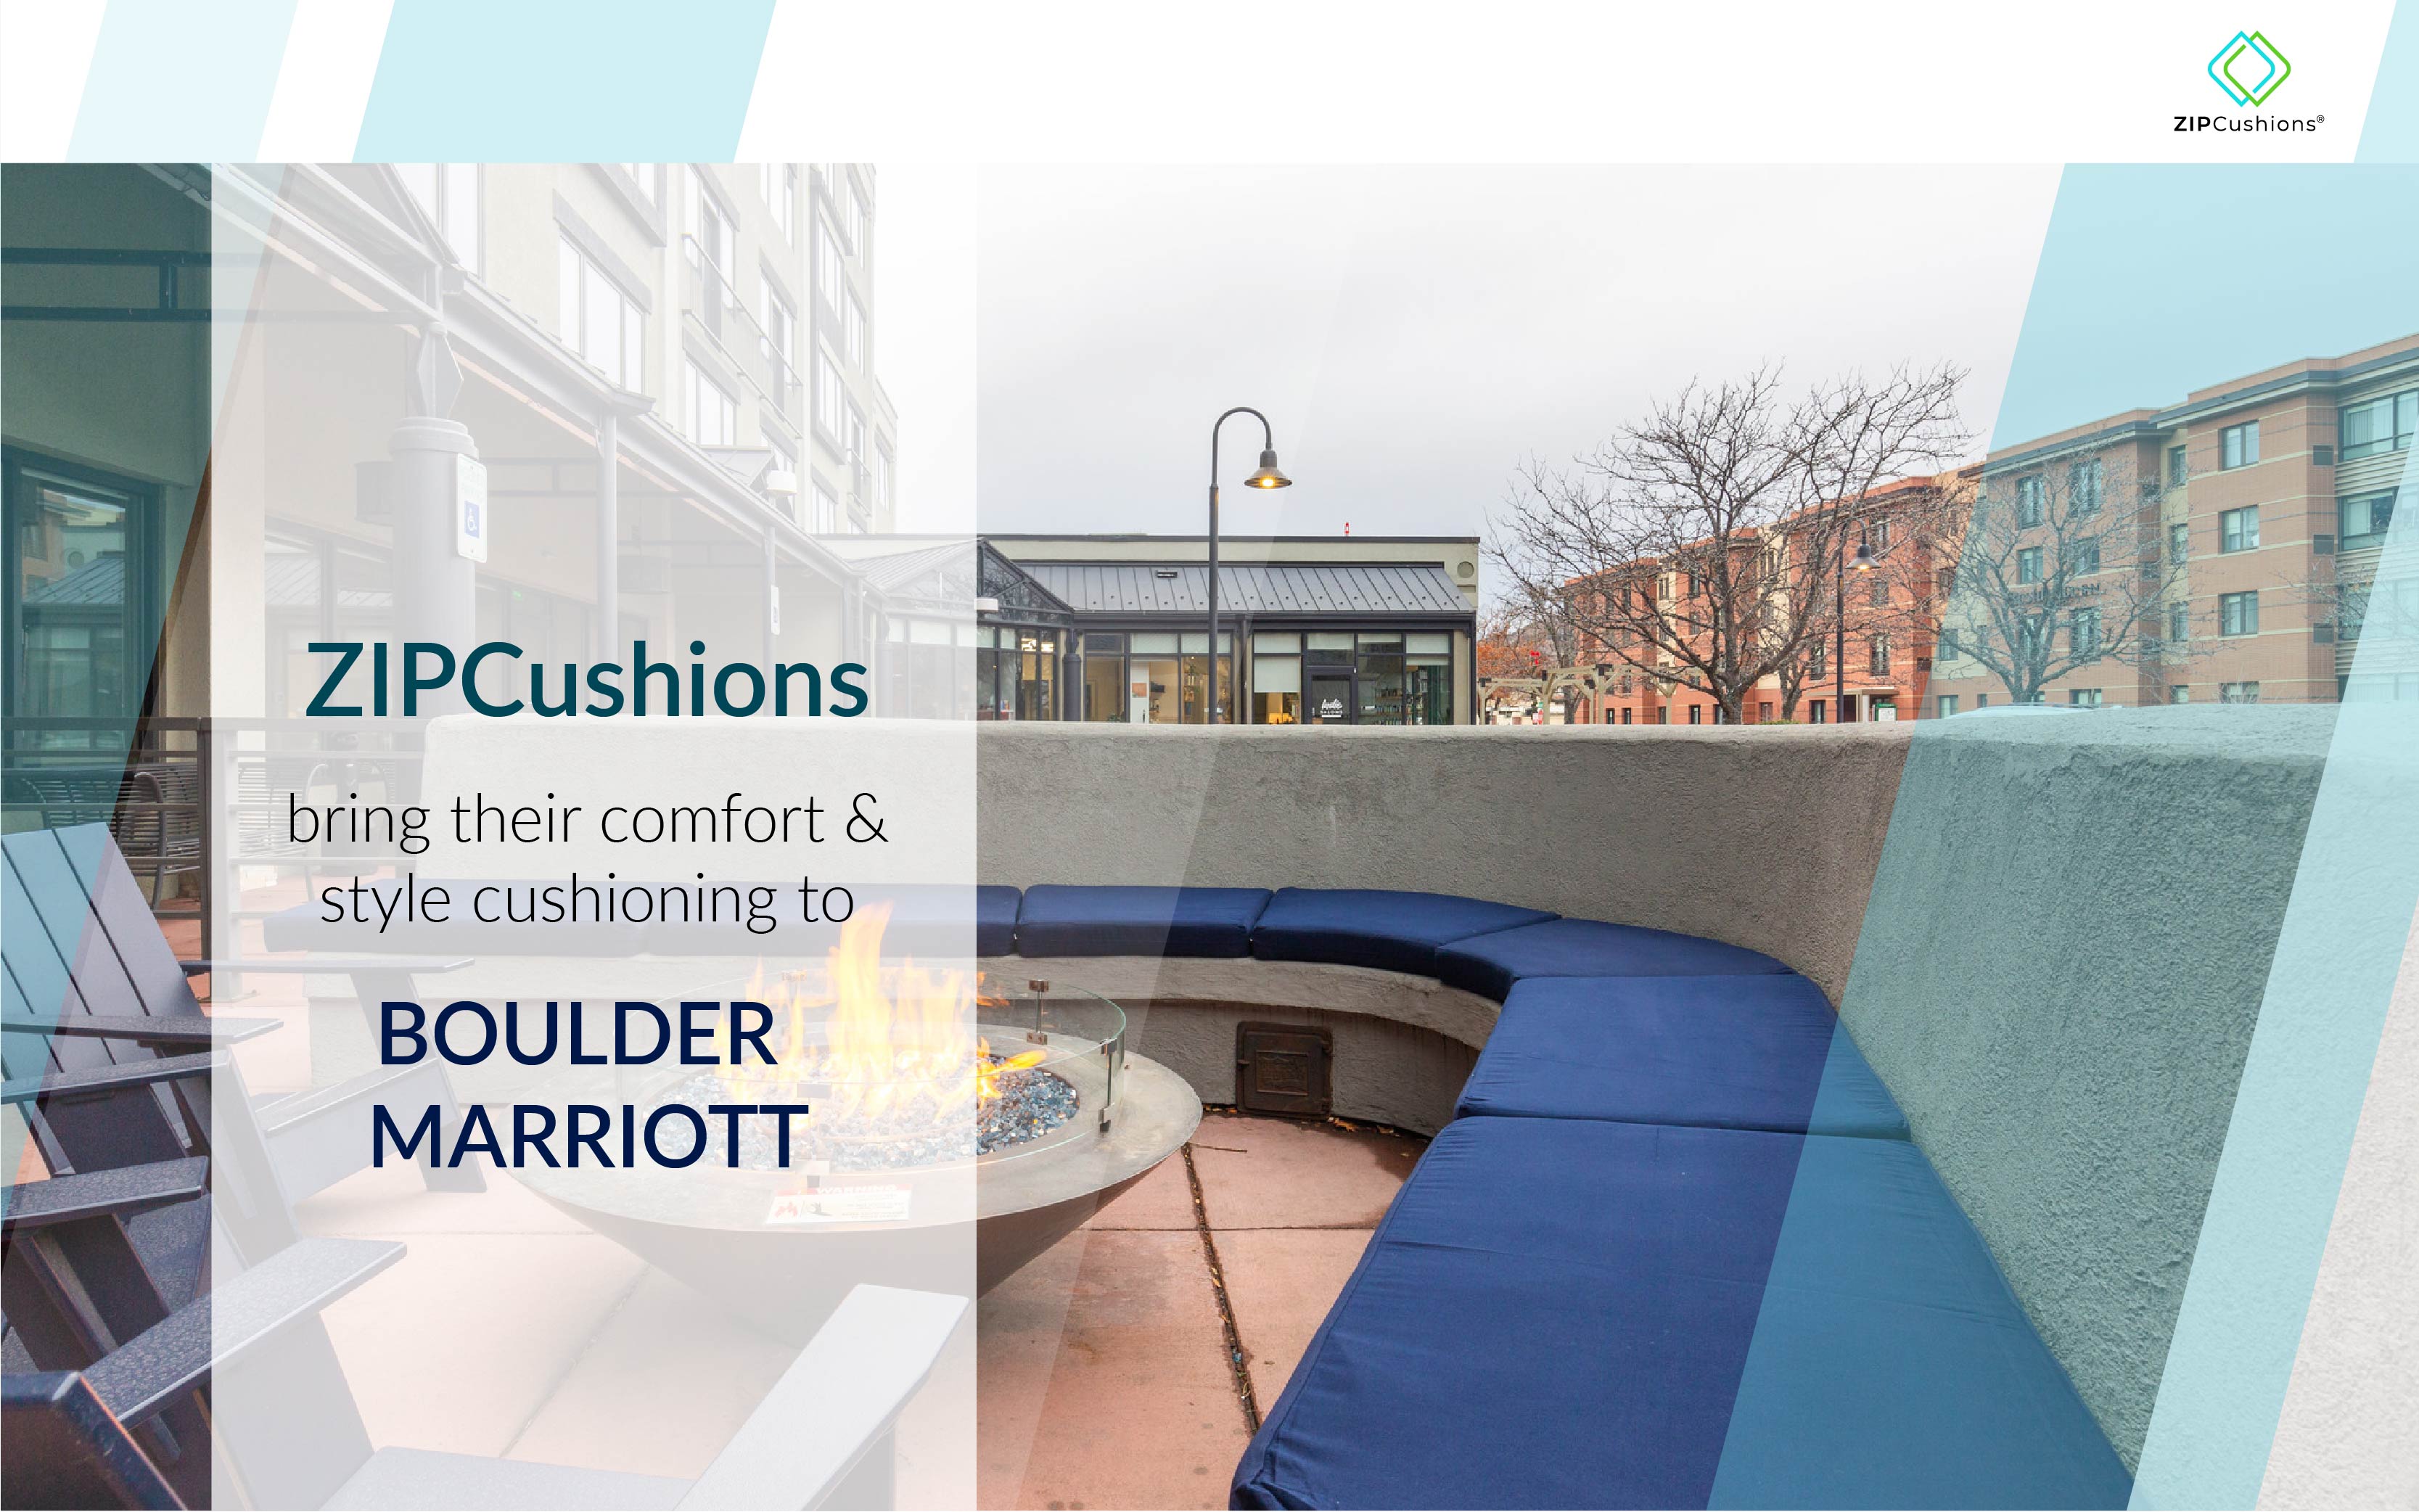 ZIPCushions bring their comfort and style cushioning to Boulder Marriott